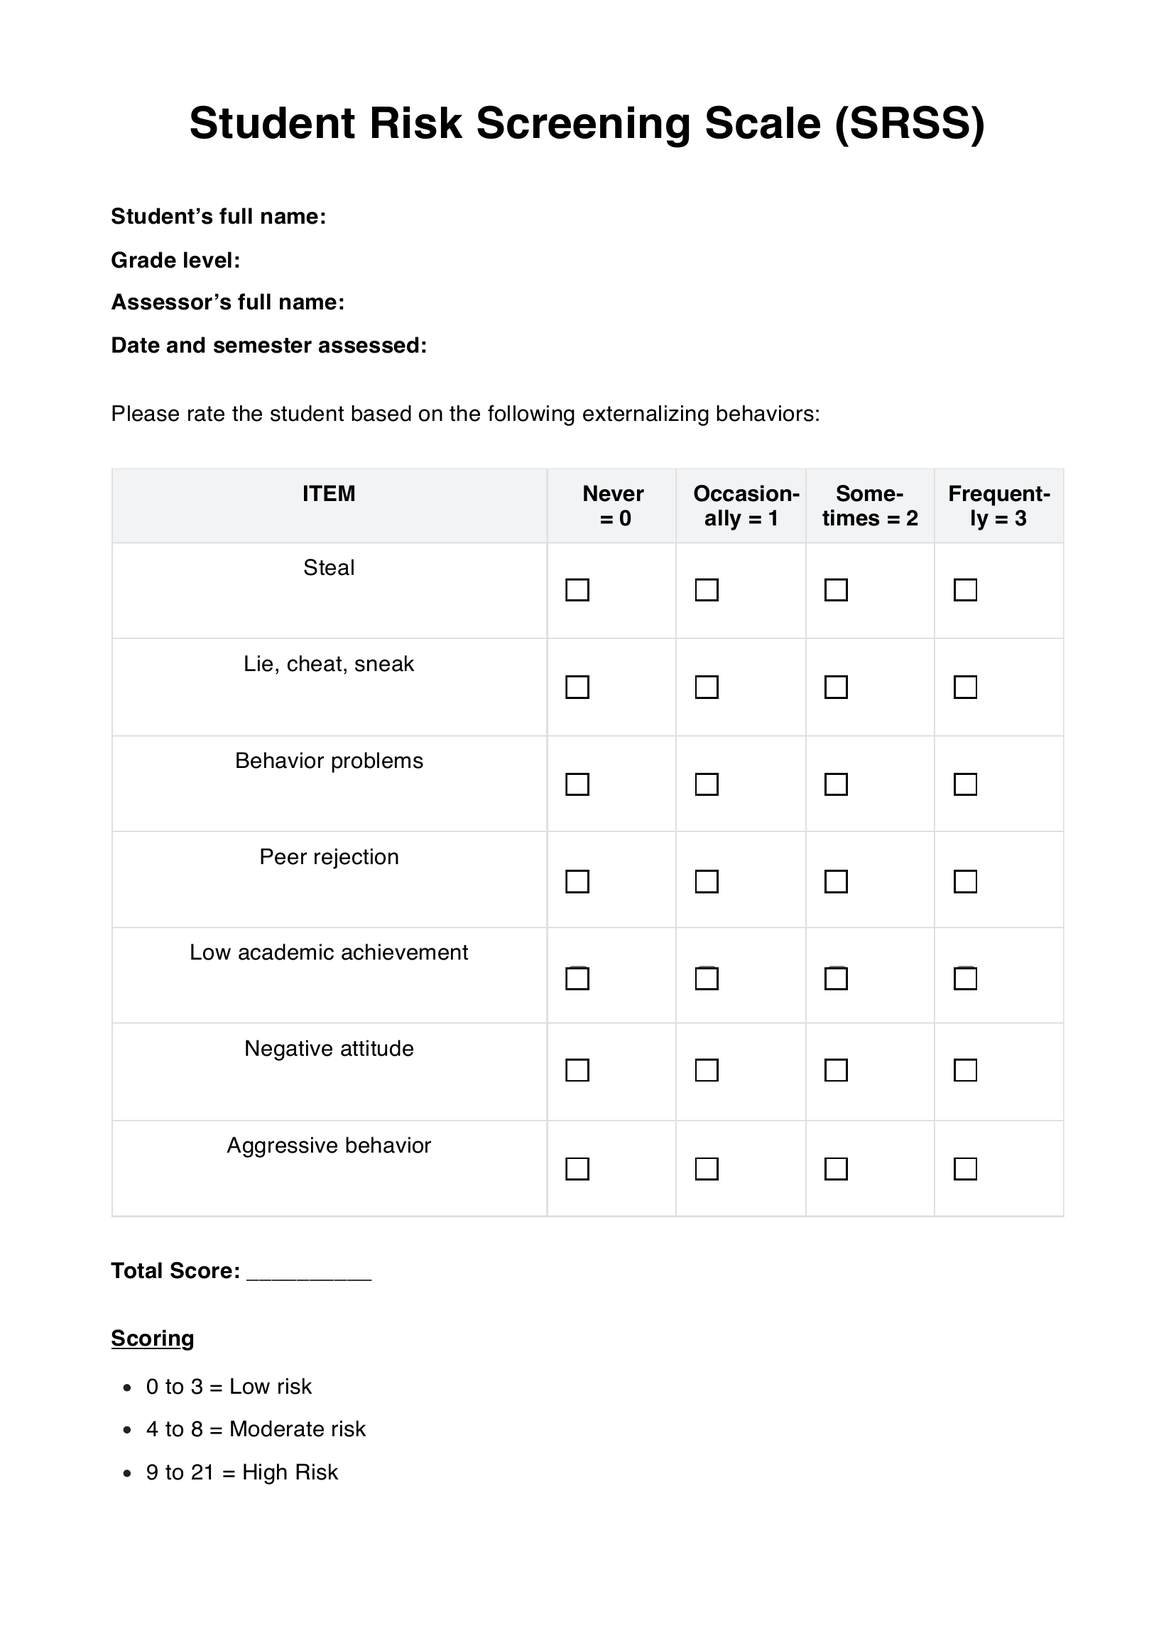 Student Risk Screening Scale (SRSS) PDF Example